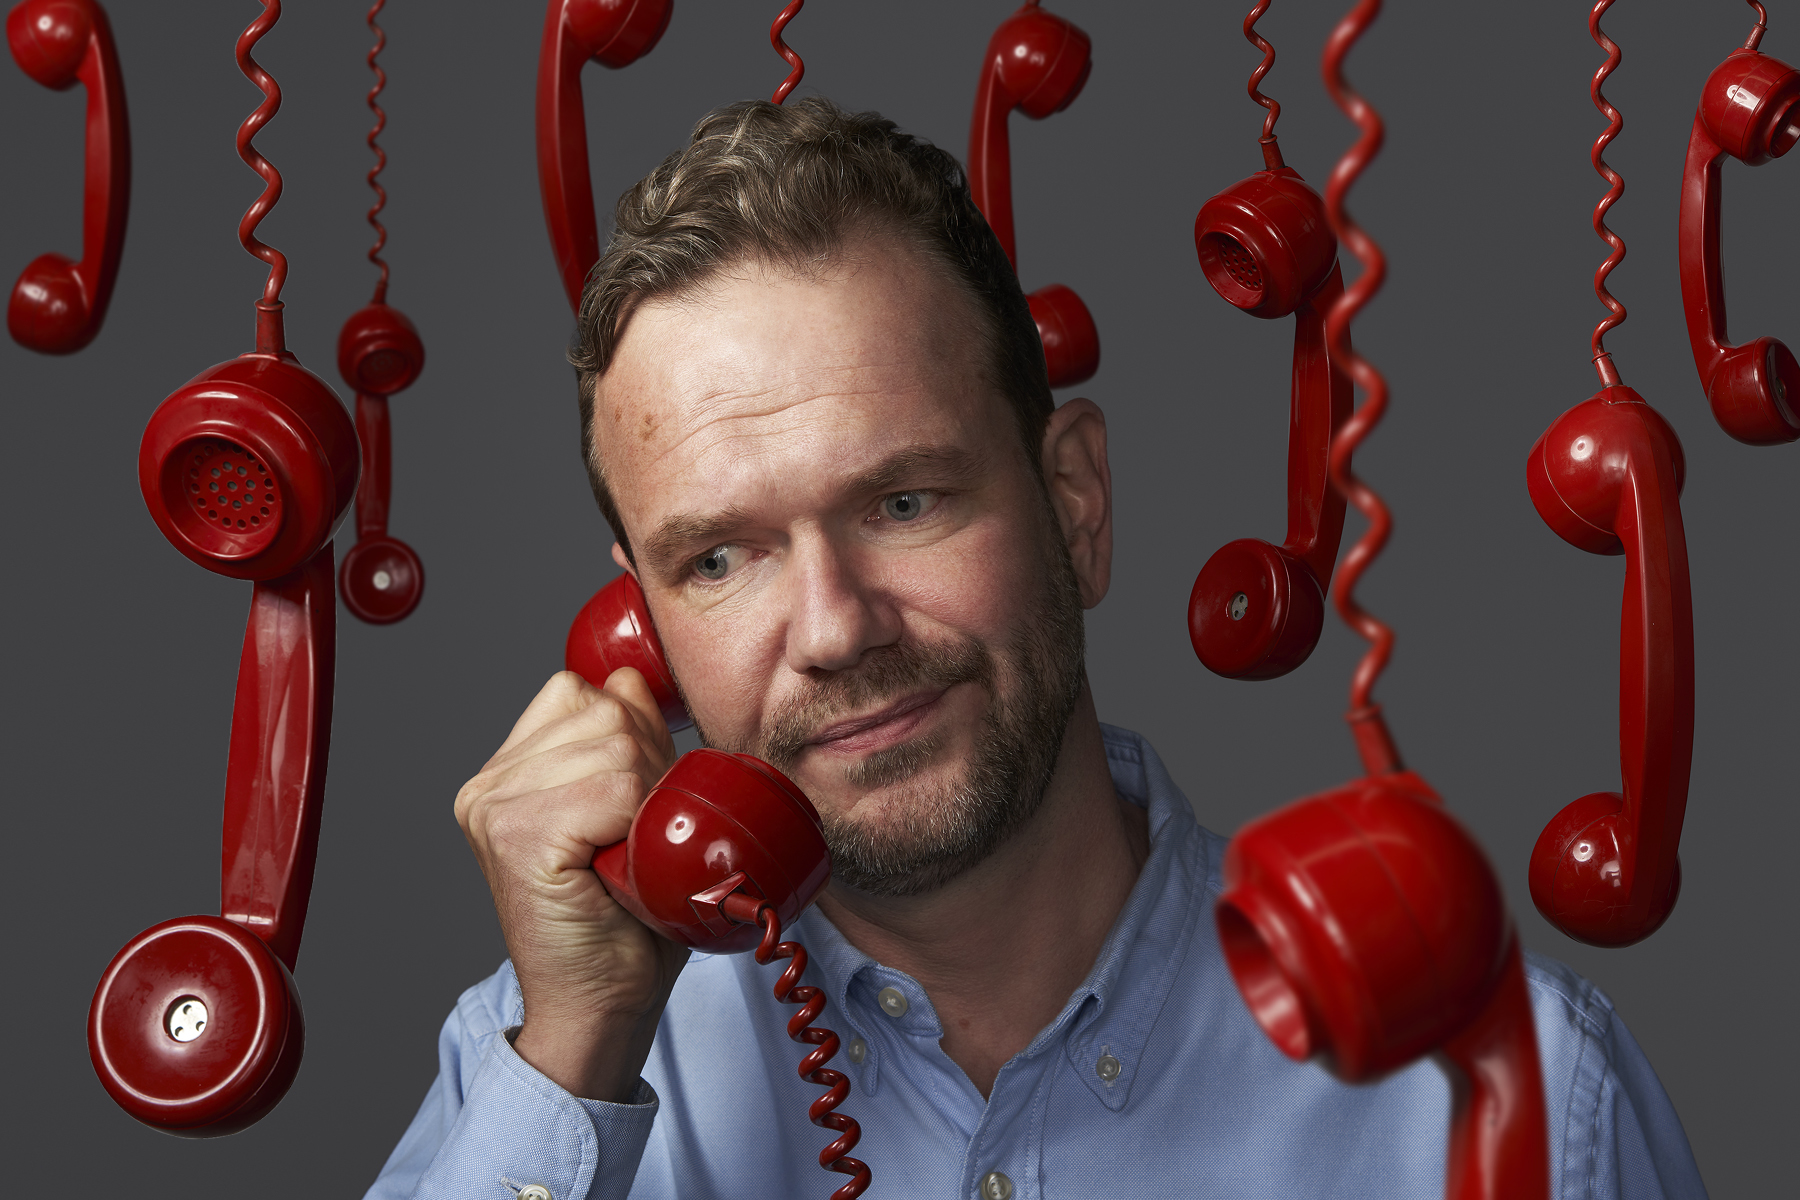 James O'Brien holds a red phone, with other red phones hanging around him.